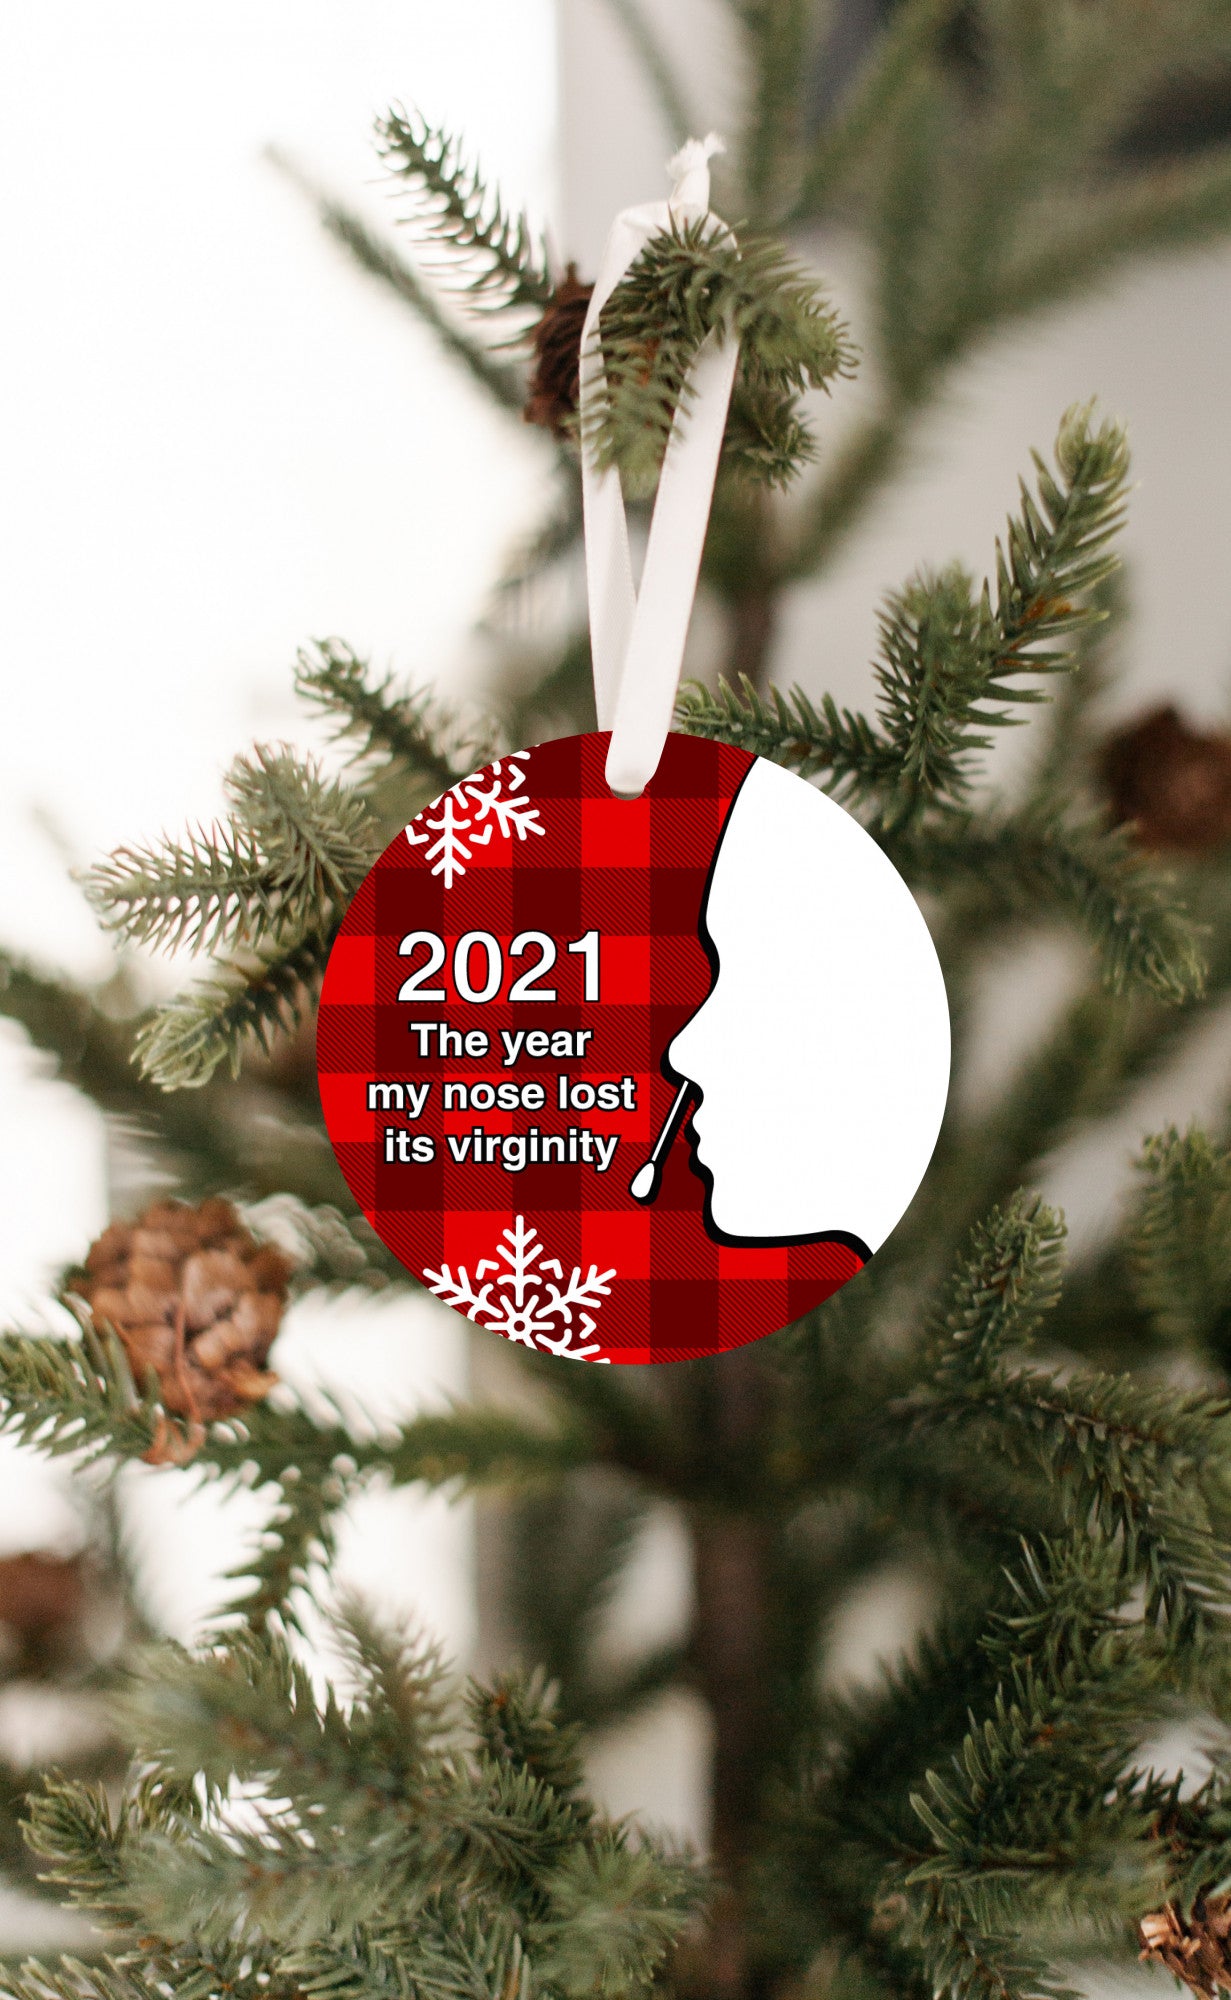 The Year my Nose Lost its Virginity Ornament, Covid Ornament, Nose Swab, Funny Ornament, Secret Santa Gift, White Elephant Gift